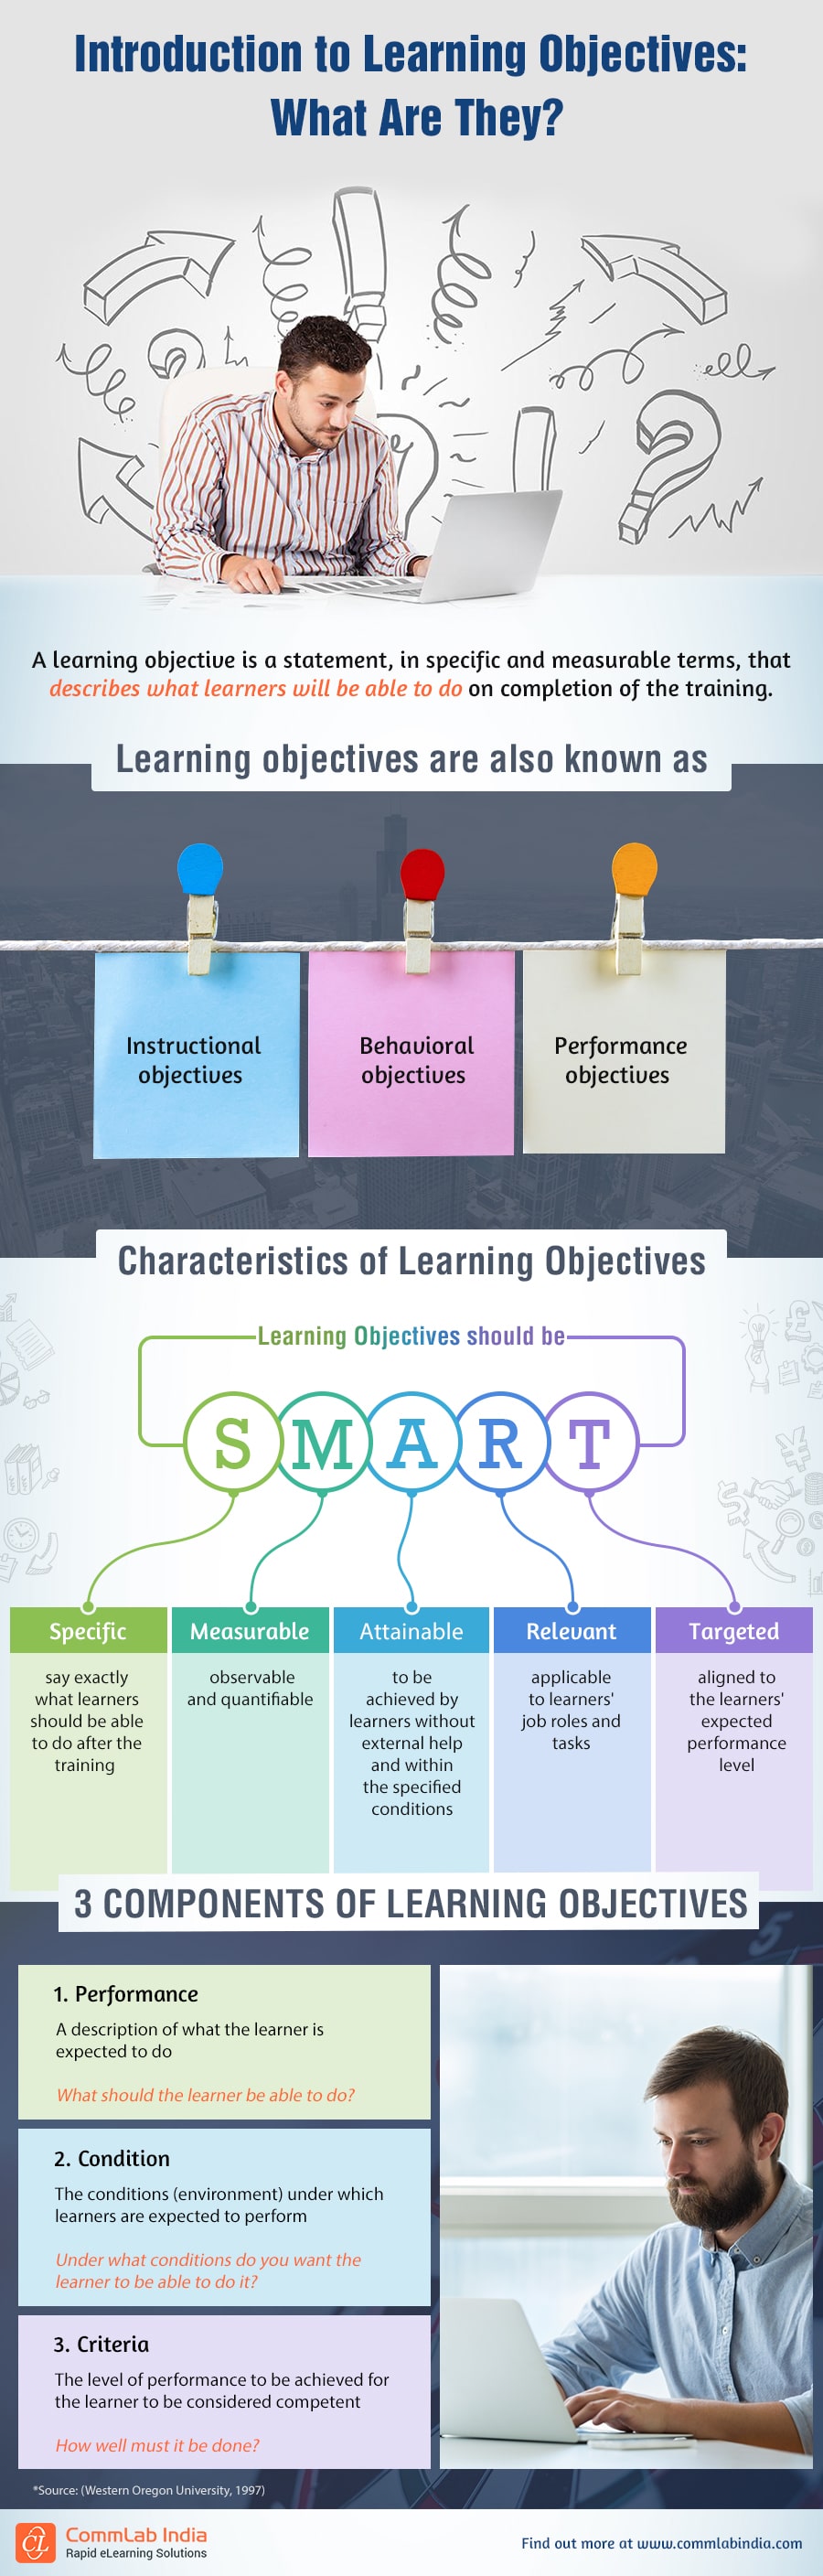 Learning Objectives: Let’s Get to Know Them Better!